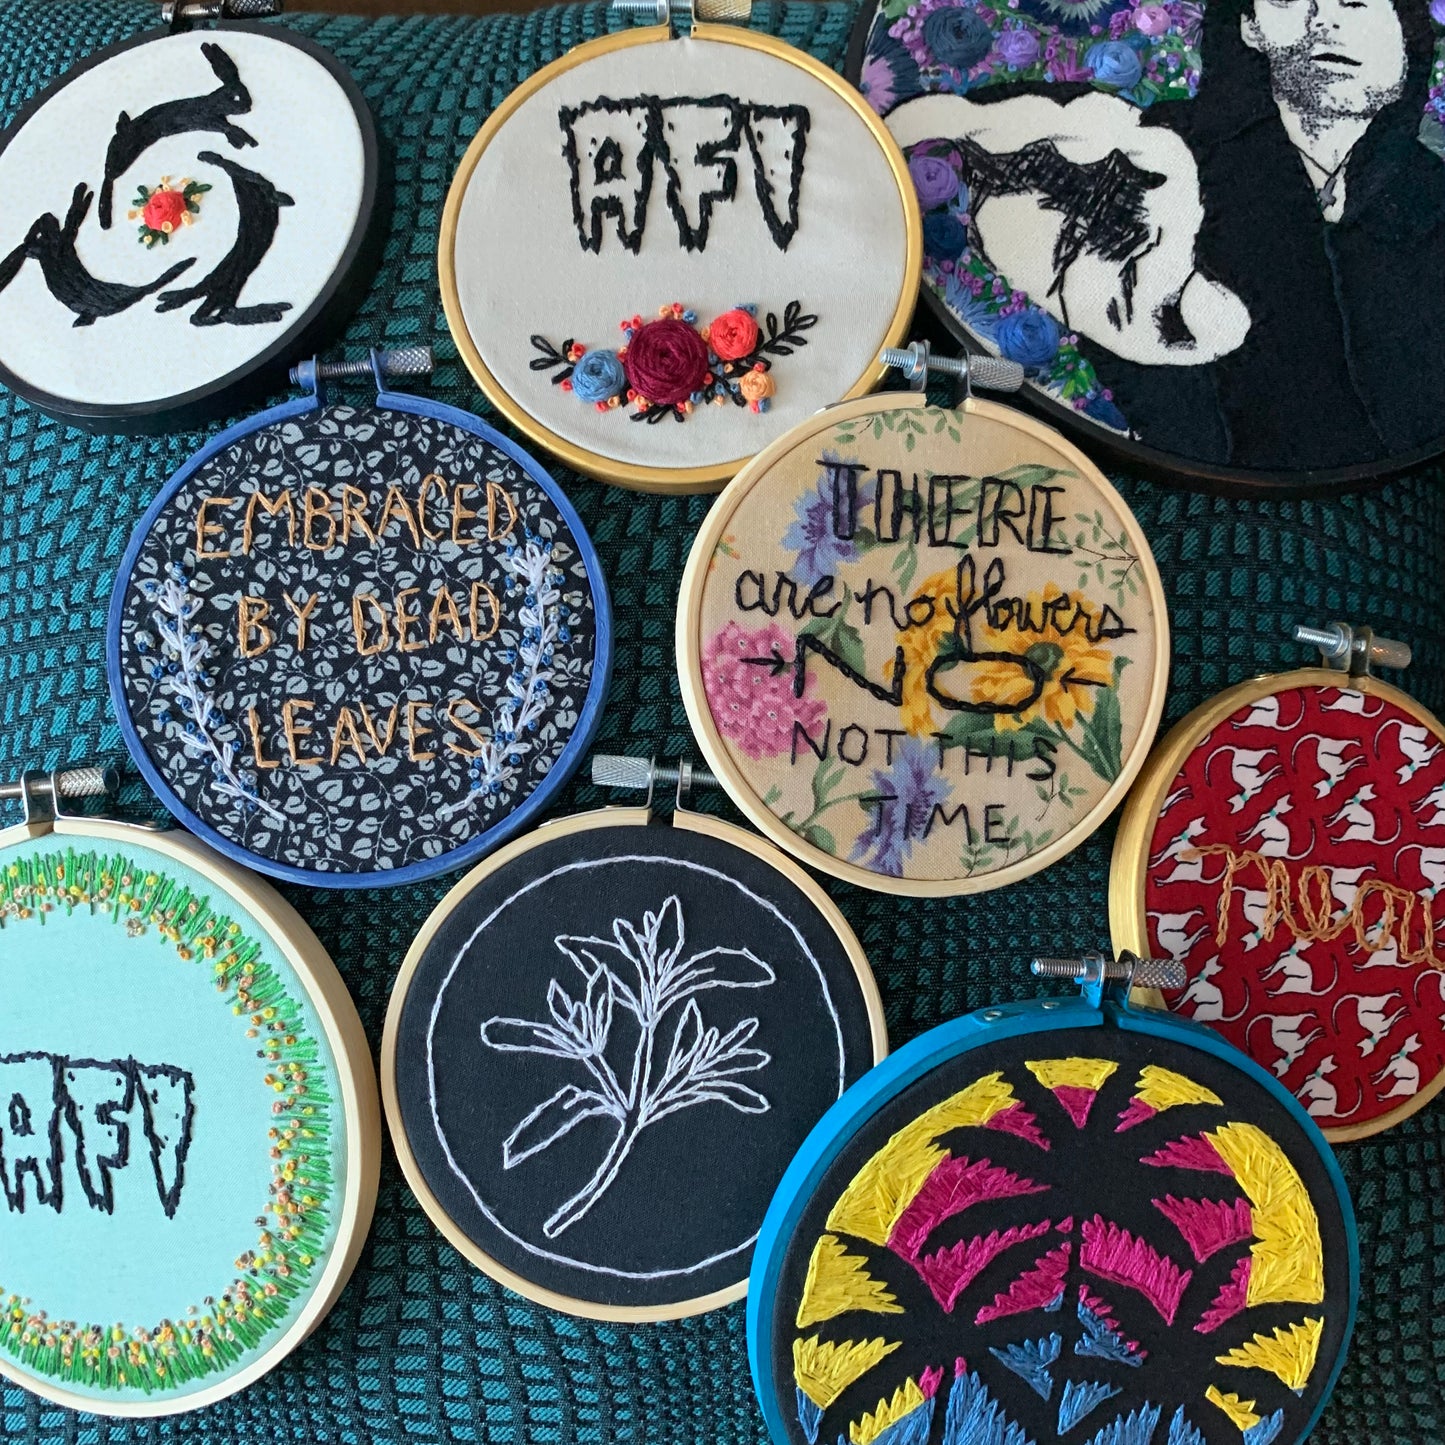 various embroidery hoops group, afi, cold cave, blaqk audio, meow, davey havok